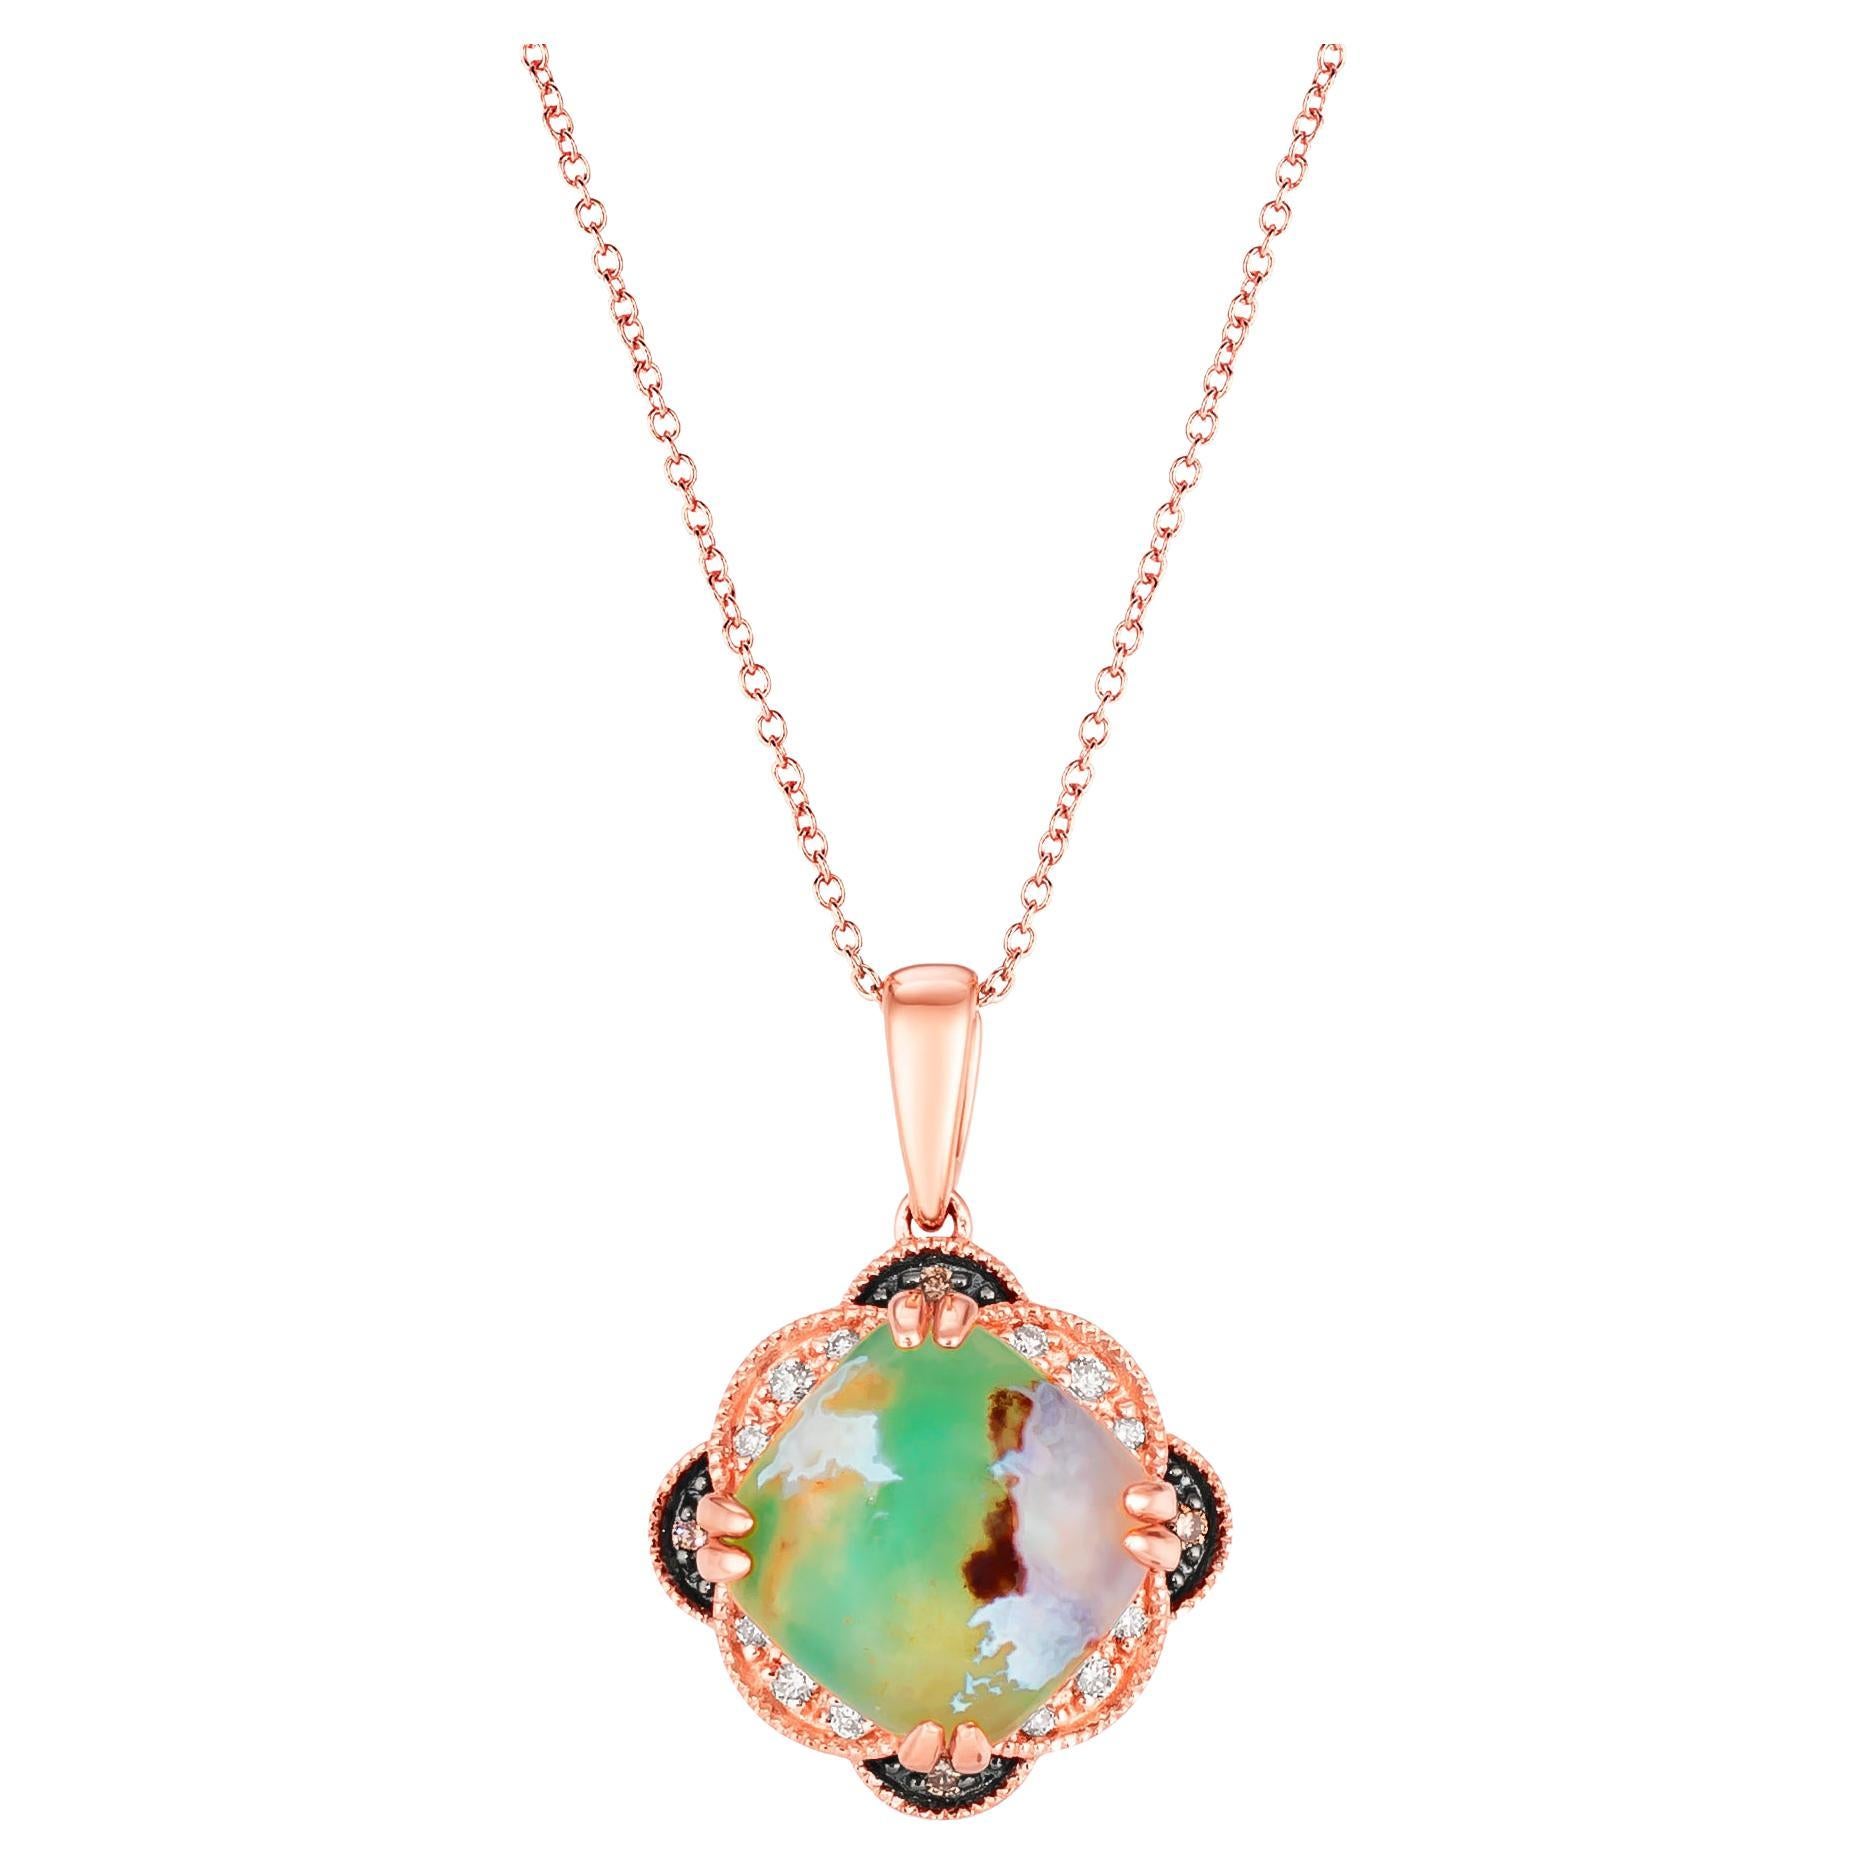 Levian Rose Gold Plated Silver Natural Aquaprase Topaz Classy Cocktail Pendant